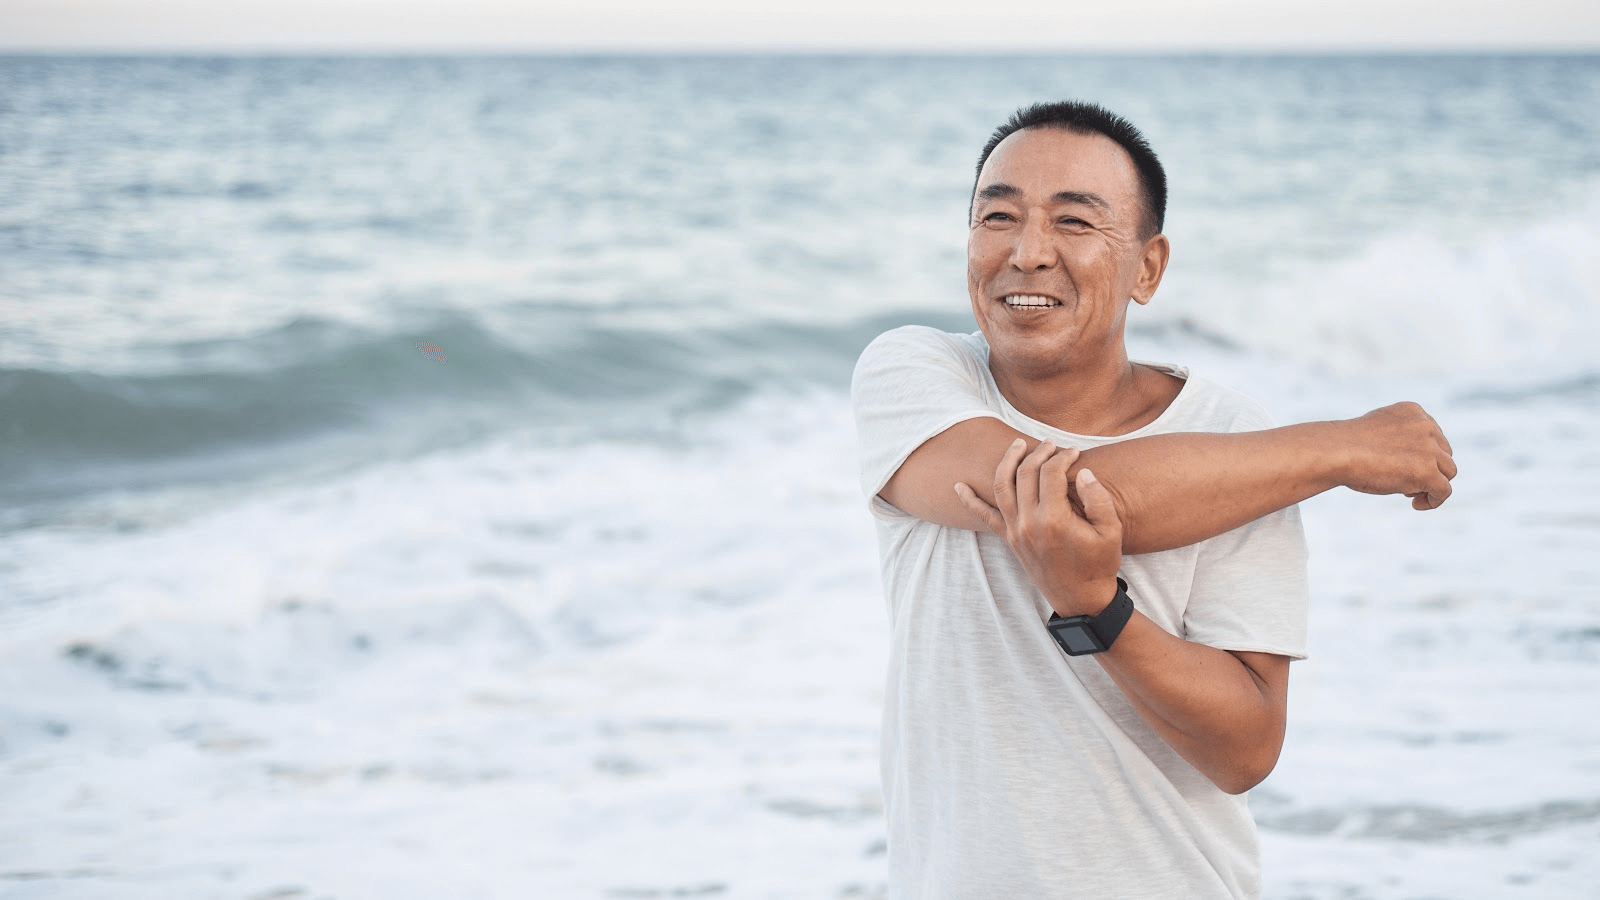 Vitamin C IV Therapy; image of a happy man stretching his right shoulder and arm on the beach.